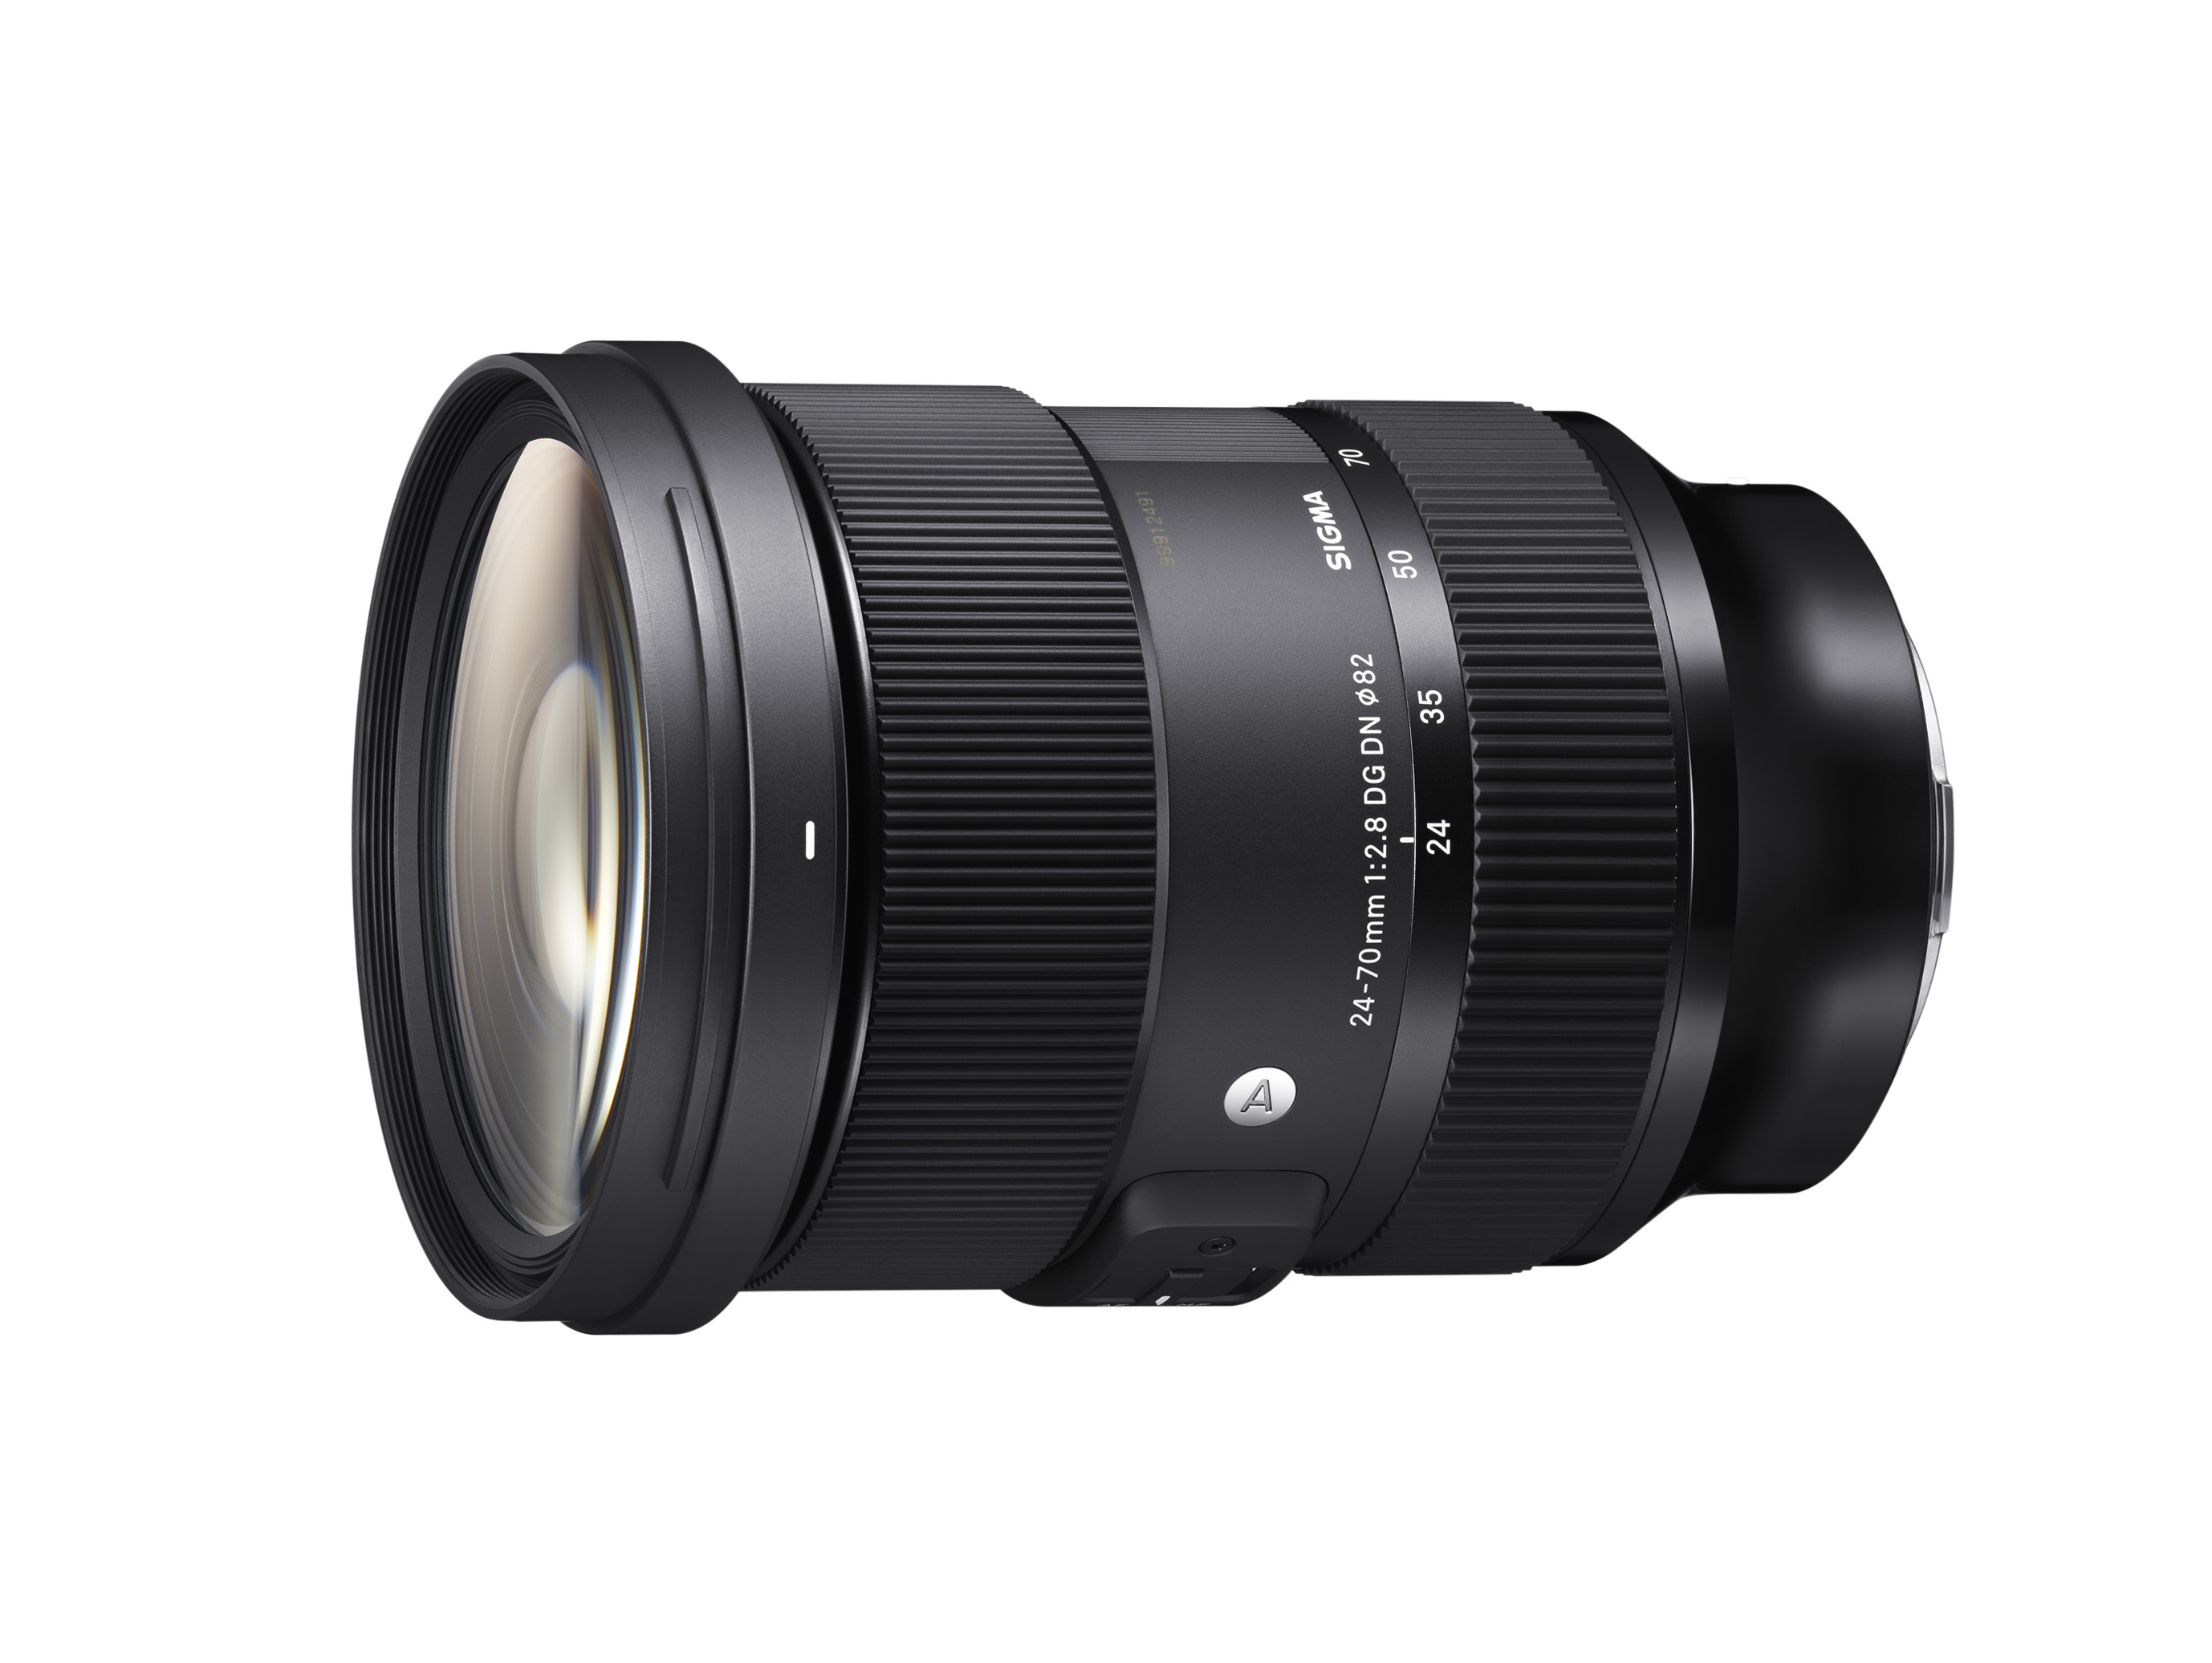 The Sigma 24-70mm F2.8 DG DN Art is Real, and Here's the Official Specs